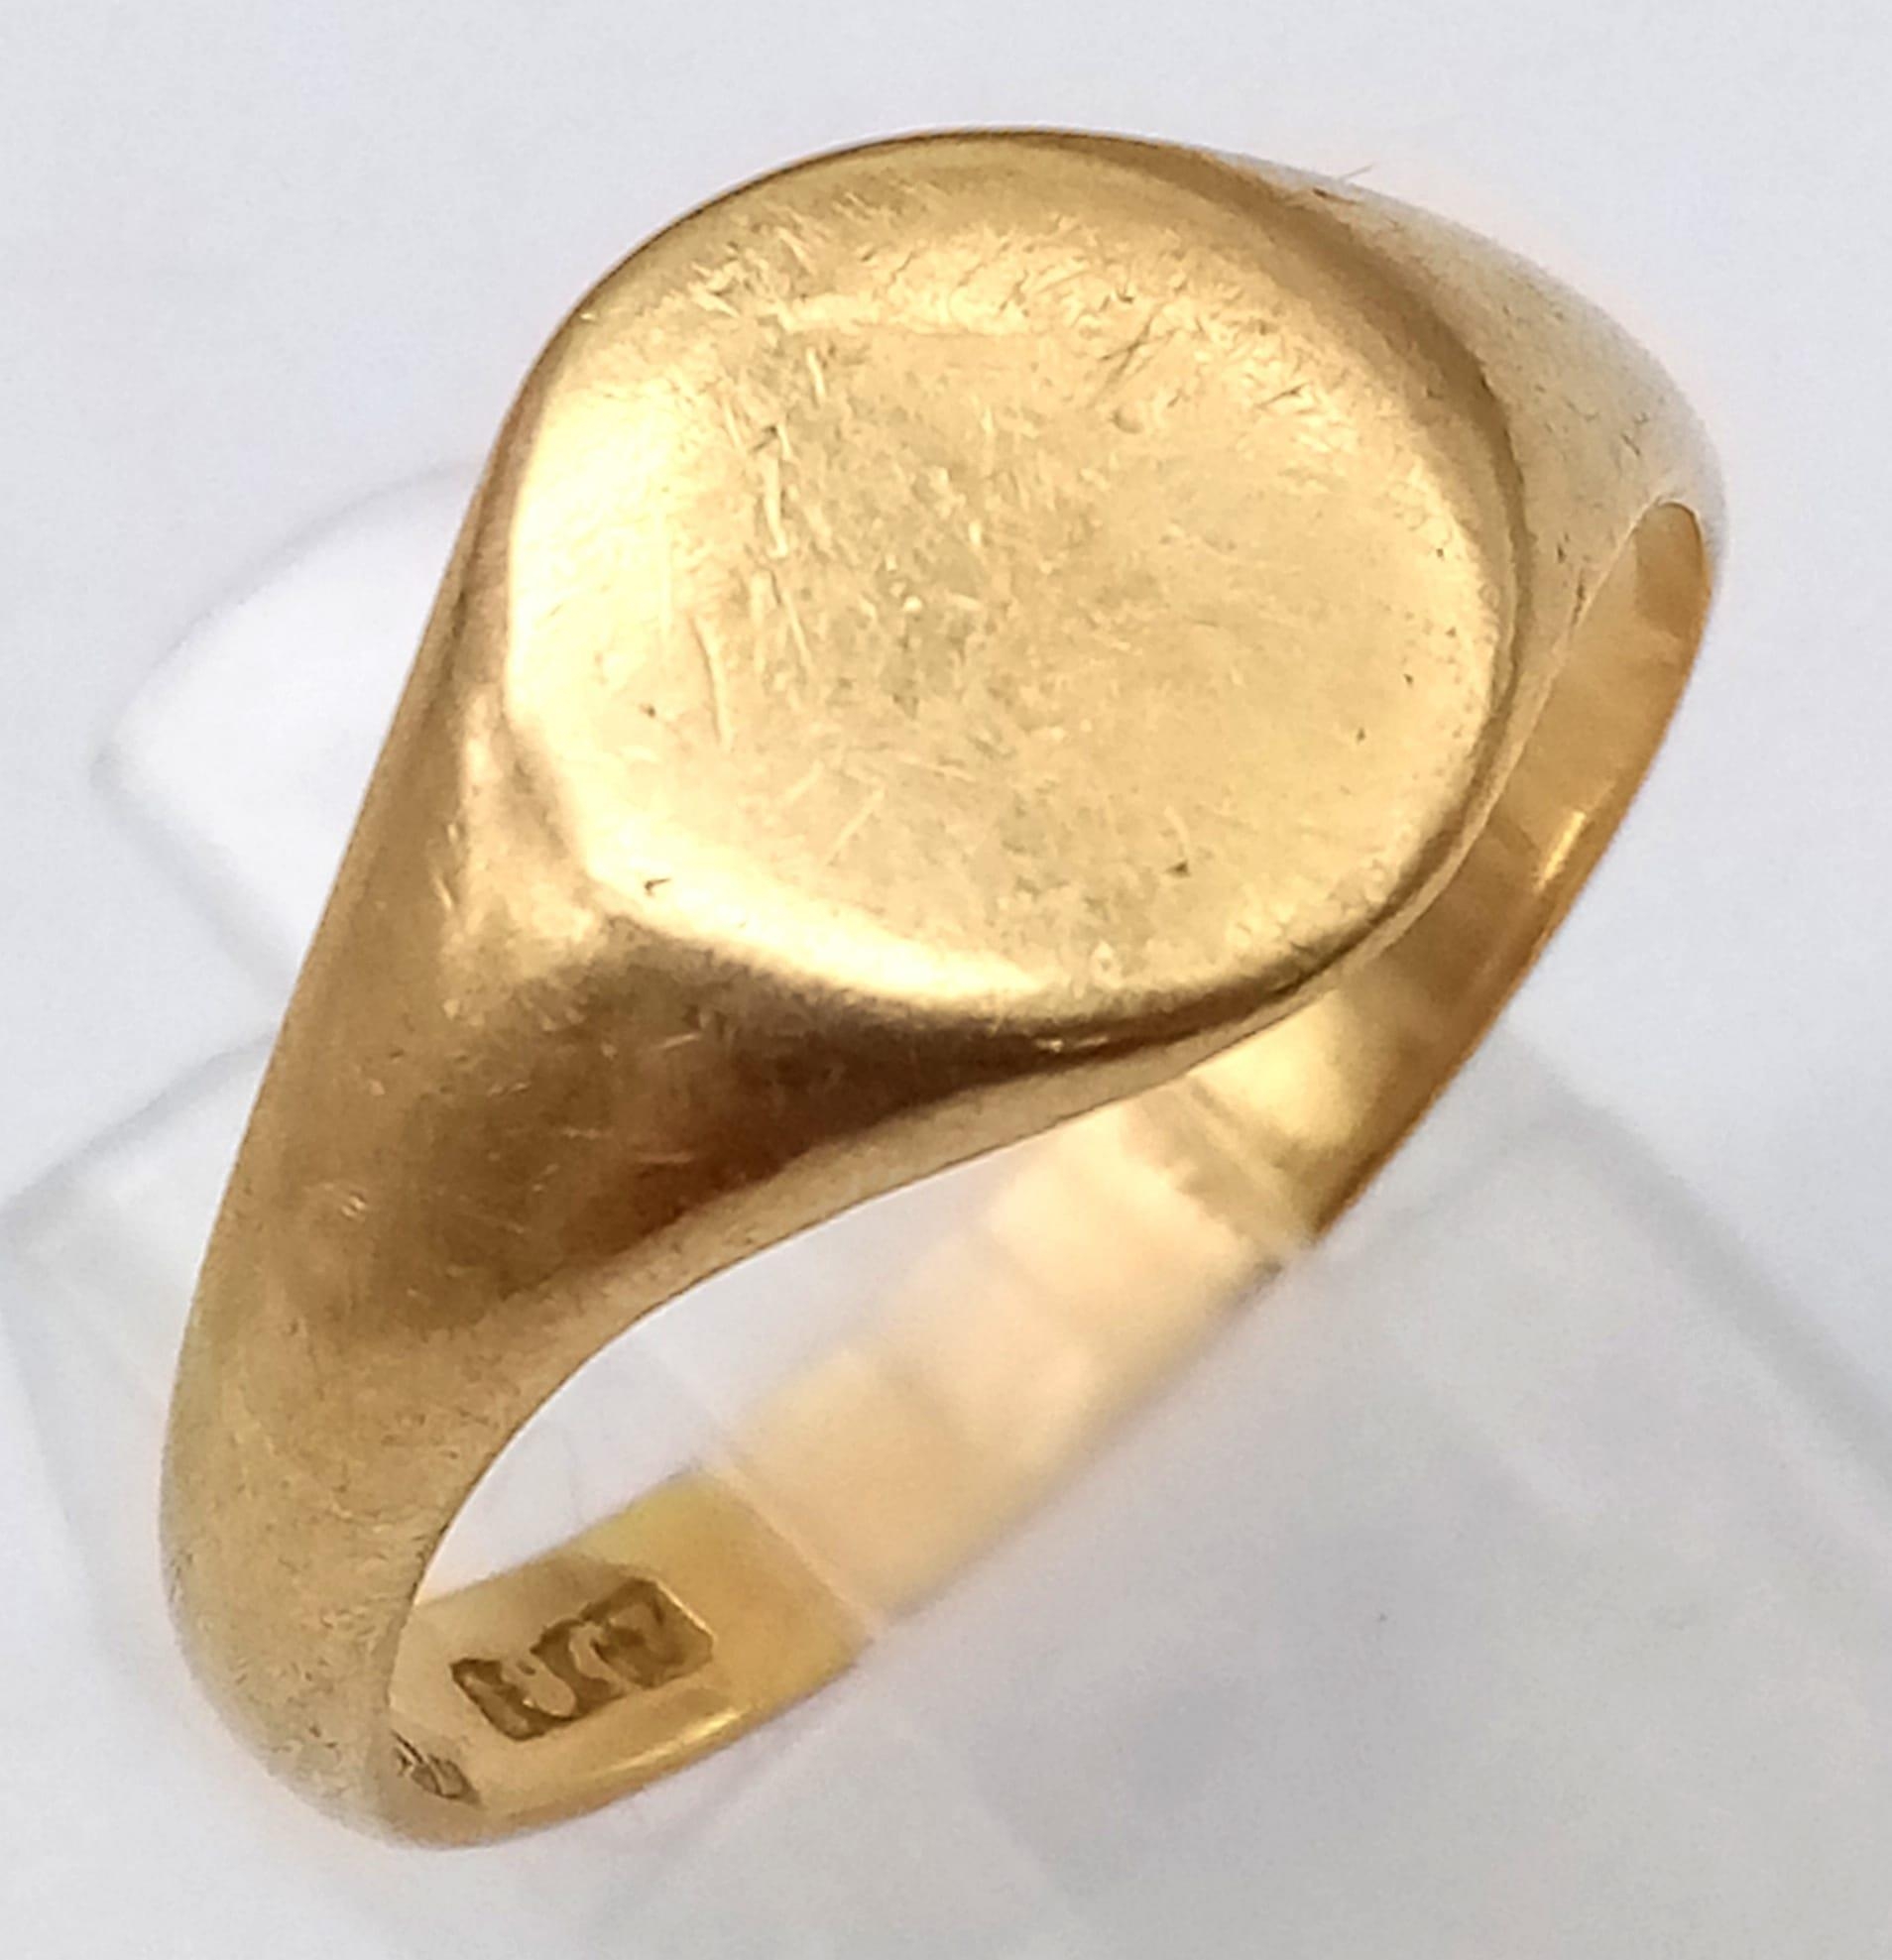 A Vintage 18K Yellow Gold Signet Ring. Size Q. 4.63g weight.